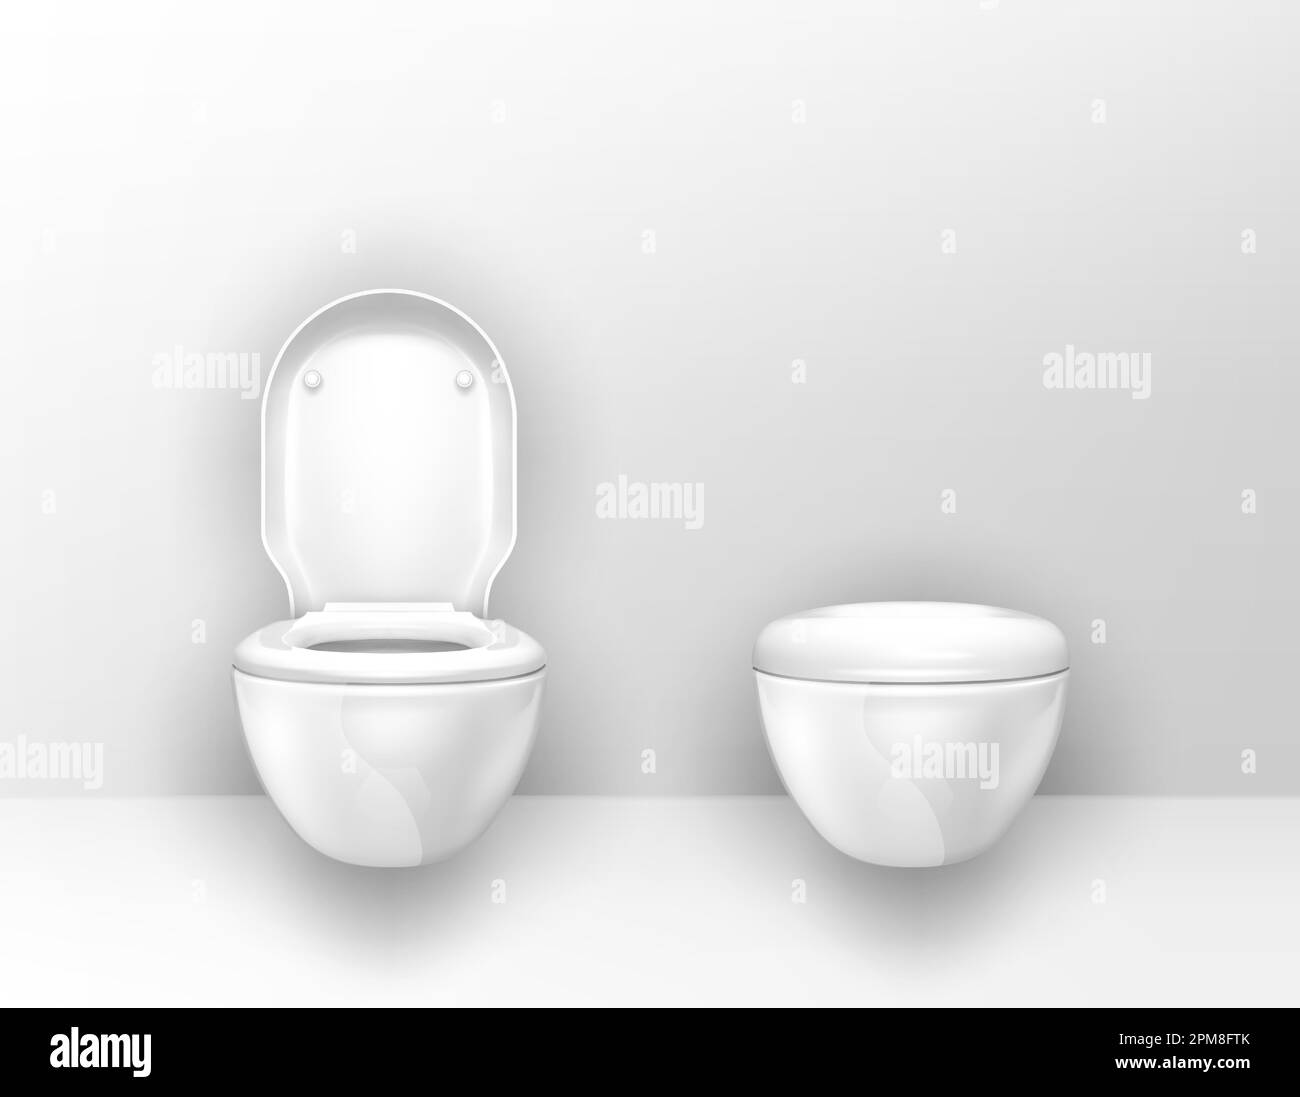 Toilet installation Stock Vector Images - Alamy